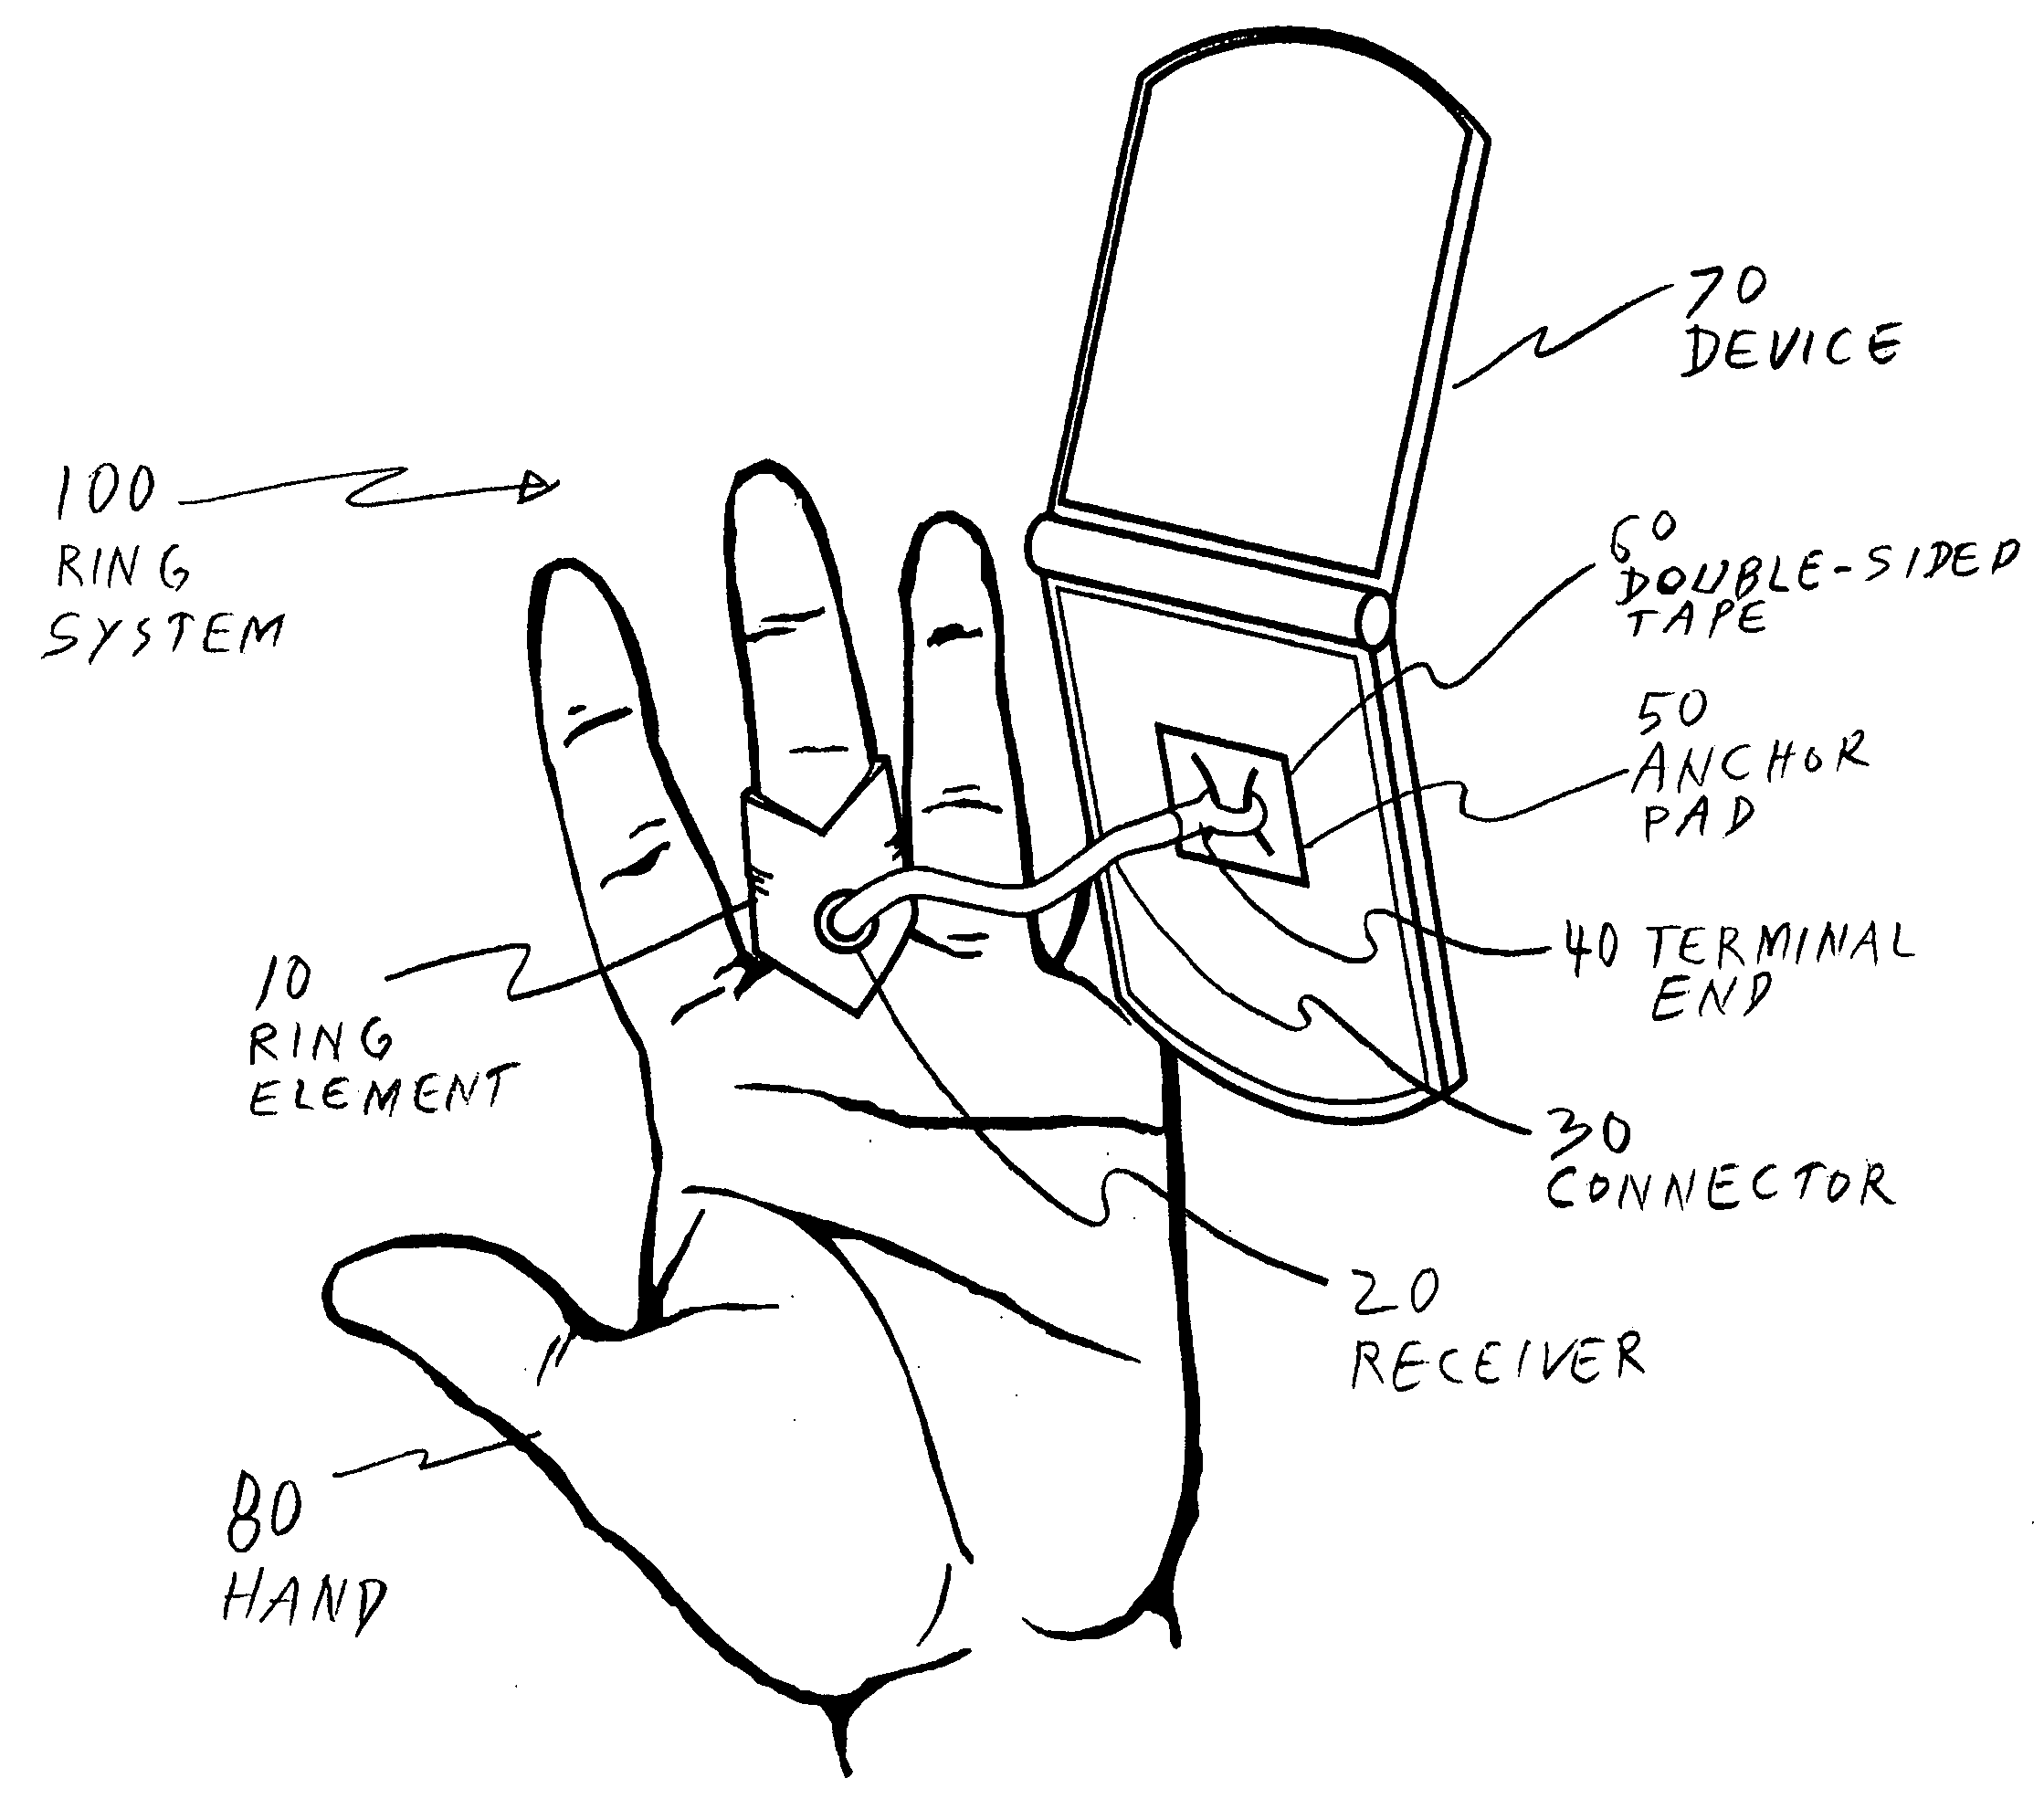 Ring system for securing devices